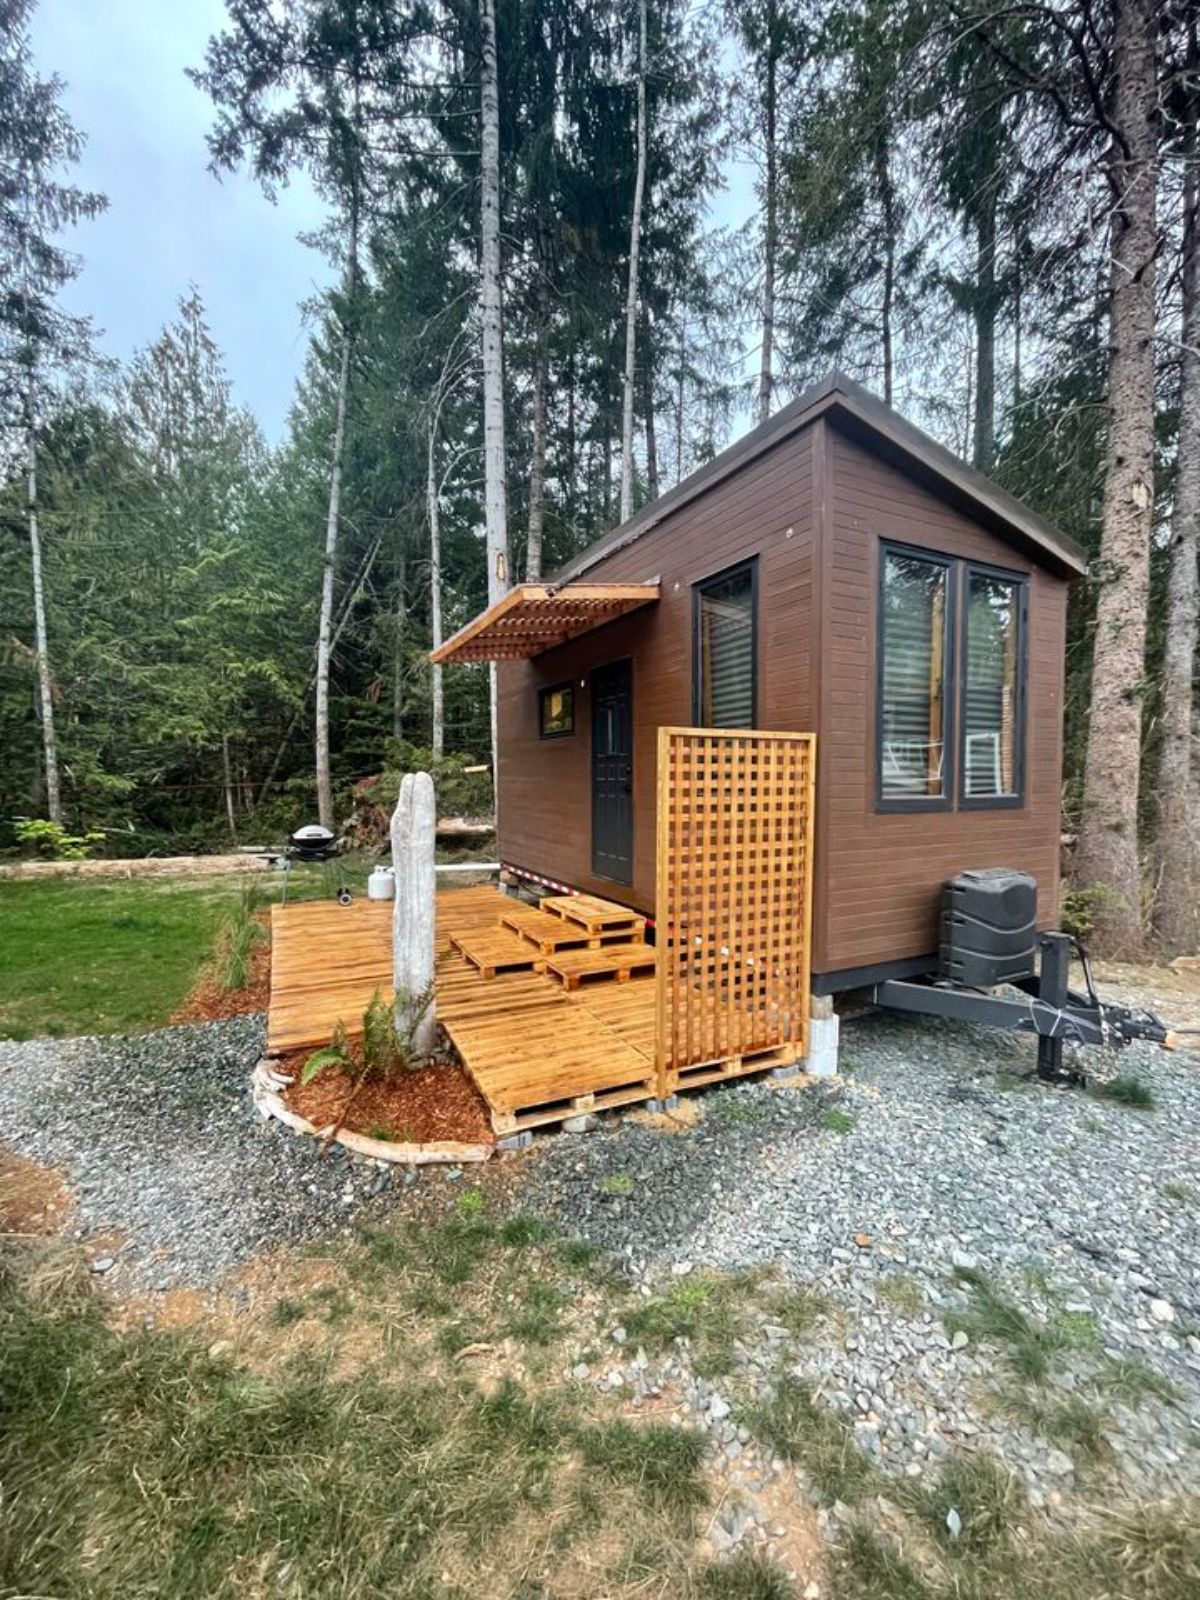 Main entrance view of 20' Custom Tiny House Captures the Essence of Tiny Living